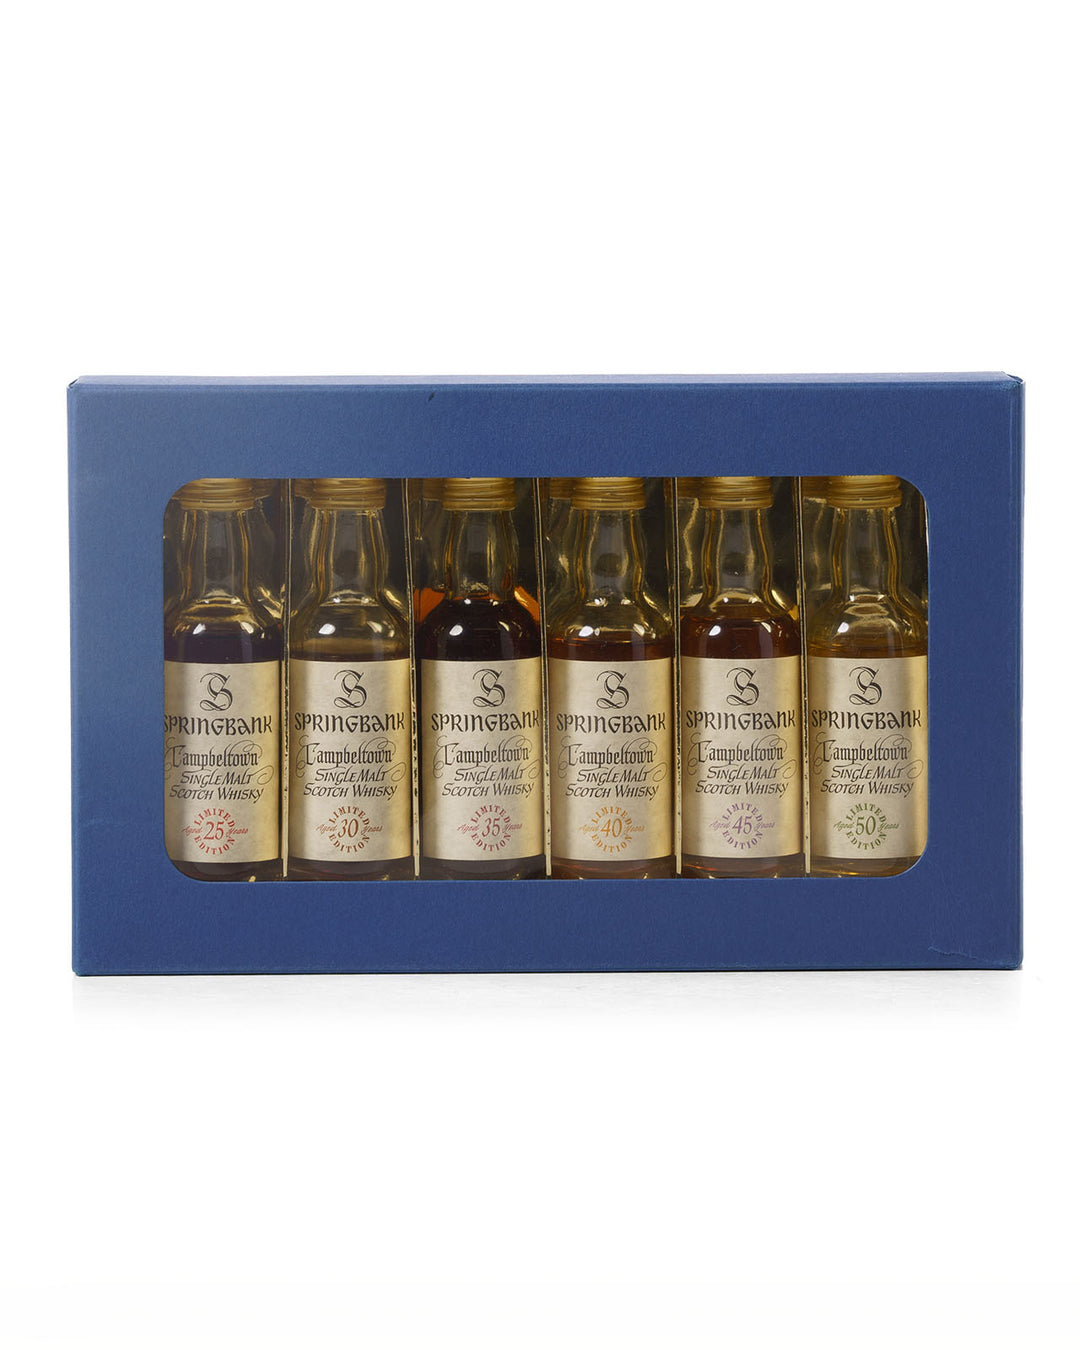 Springbank Millennium Miniatures 25, 30, 35, 40, 45 and 50 Years Old